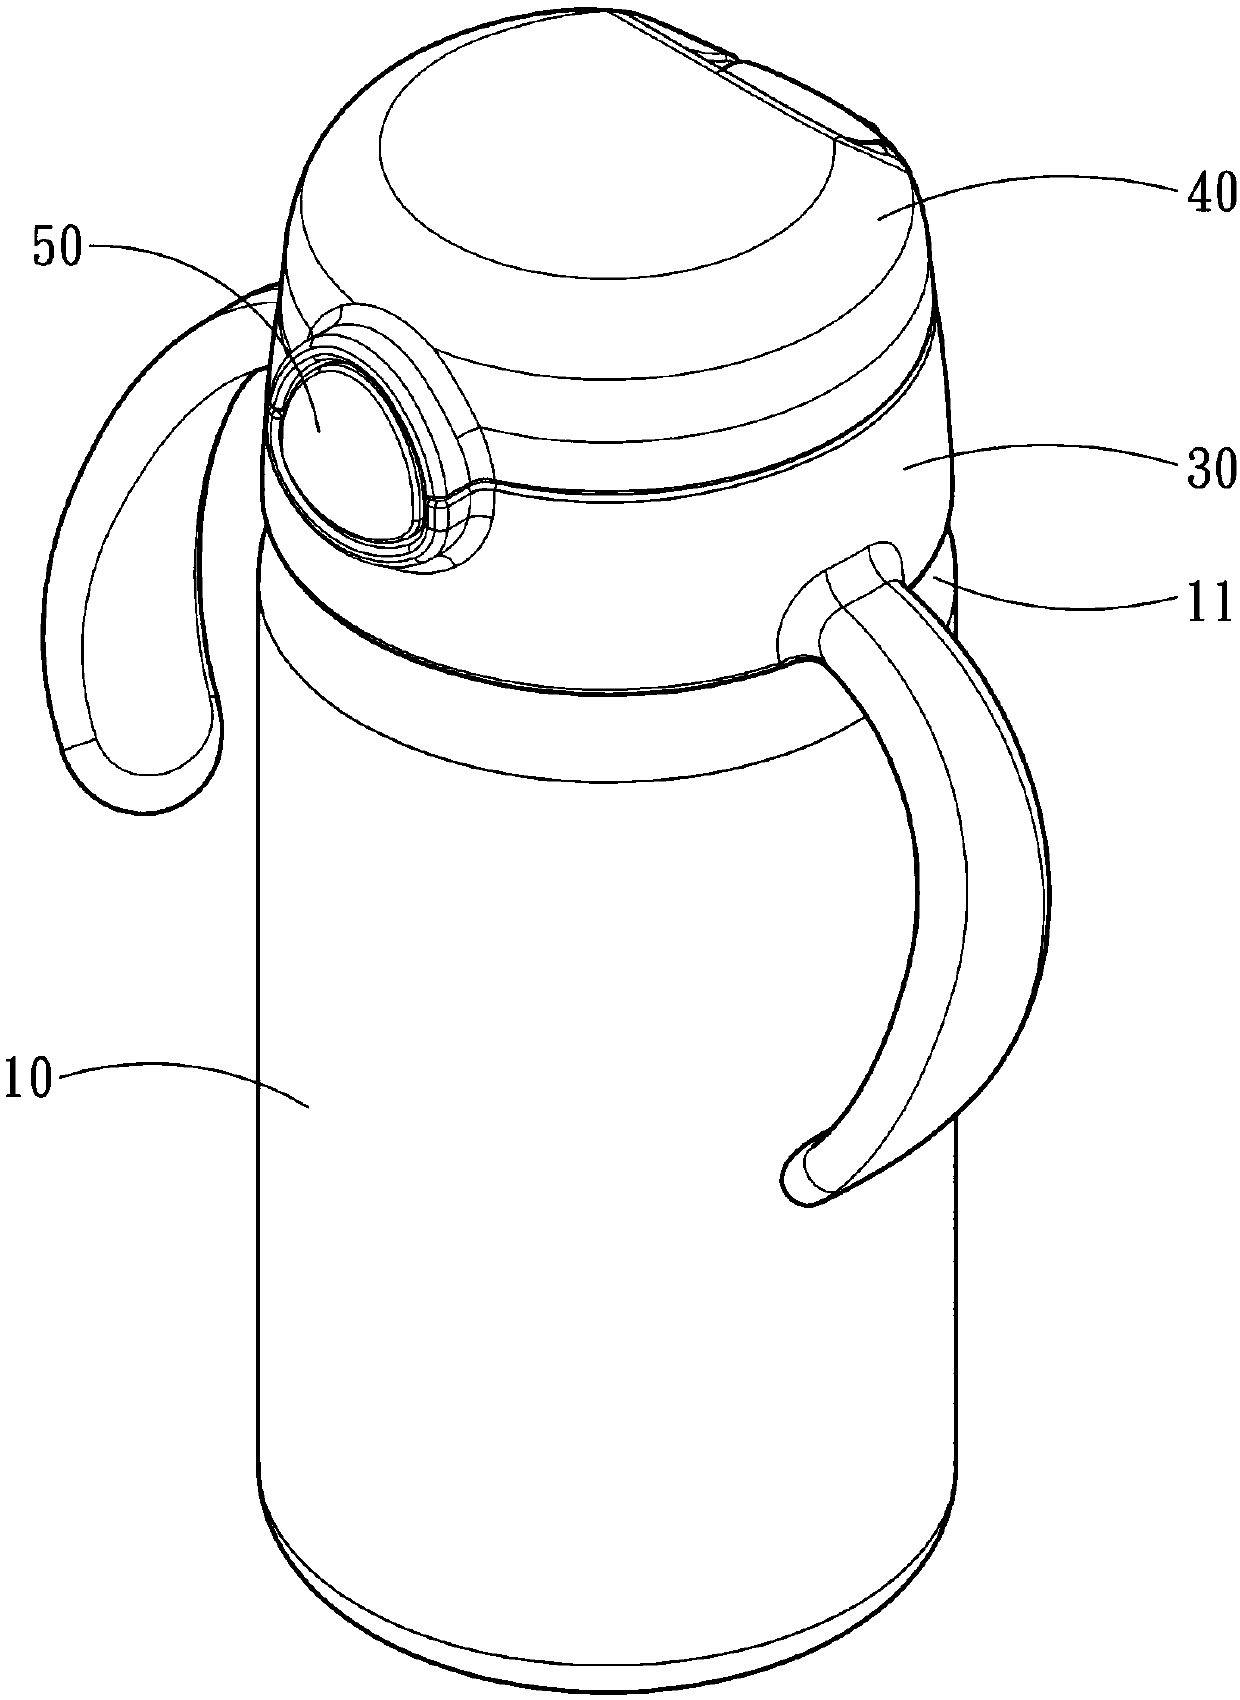 Kettle cover with pressure relief device